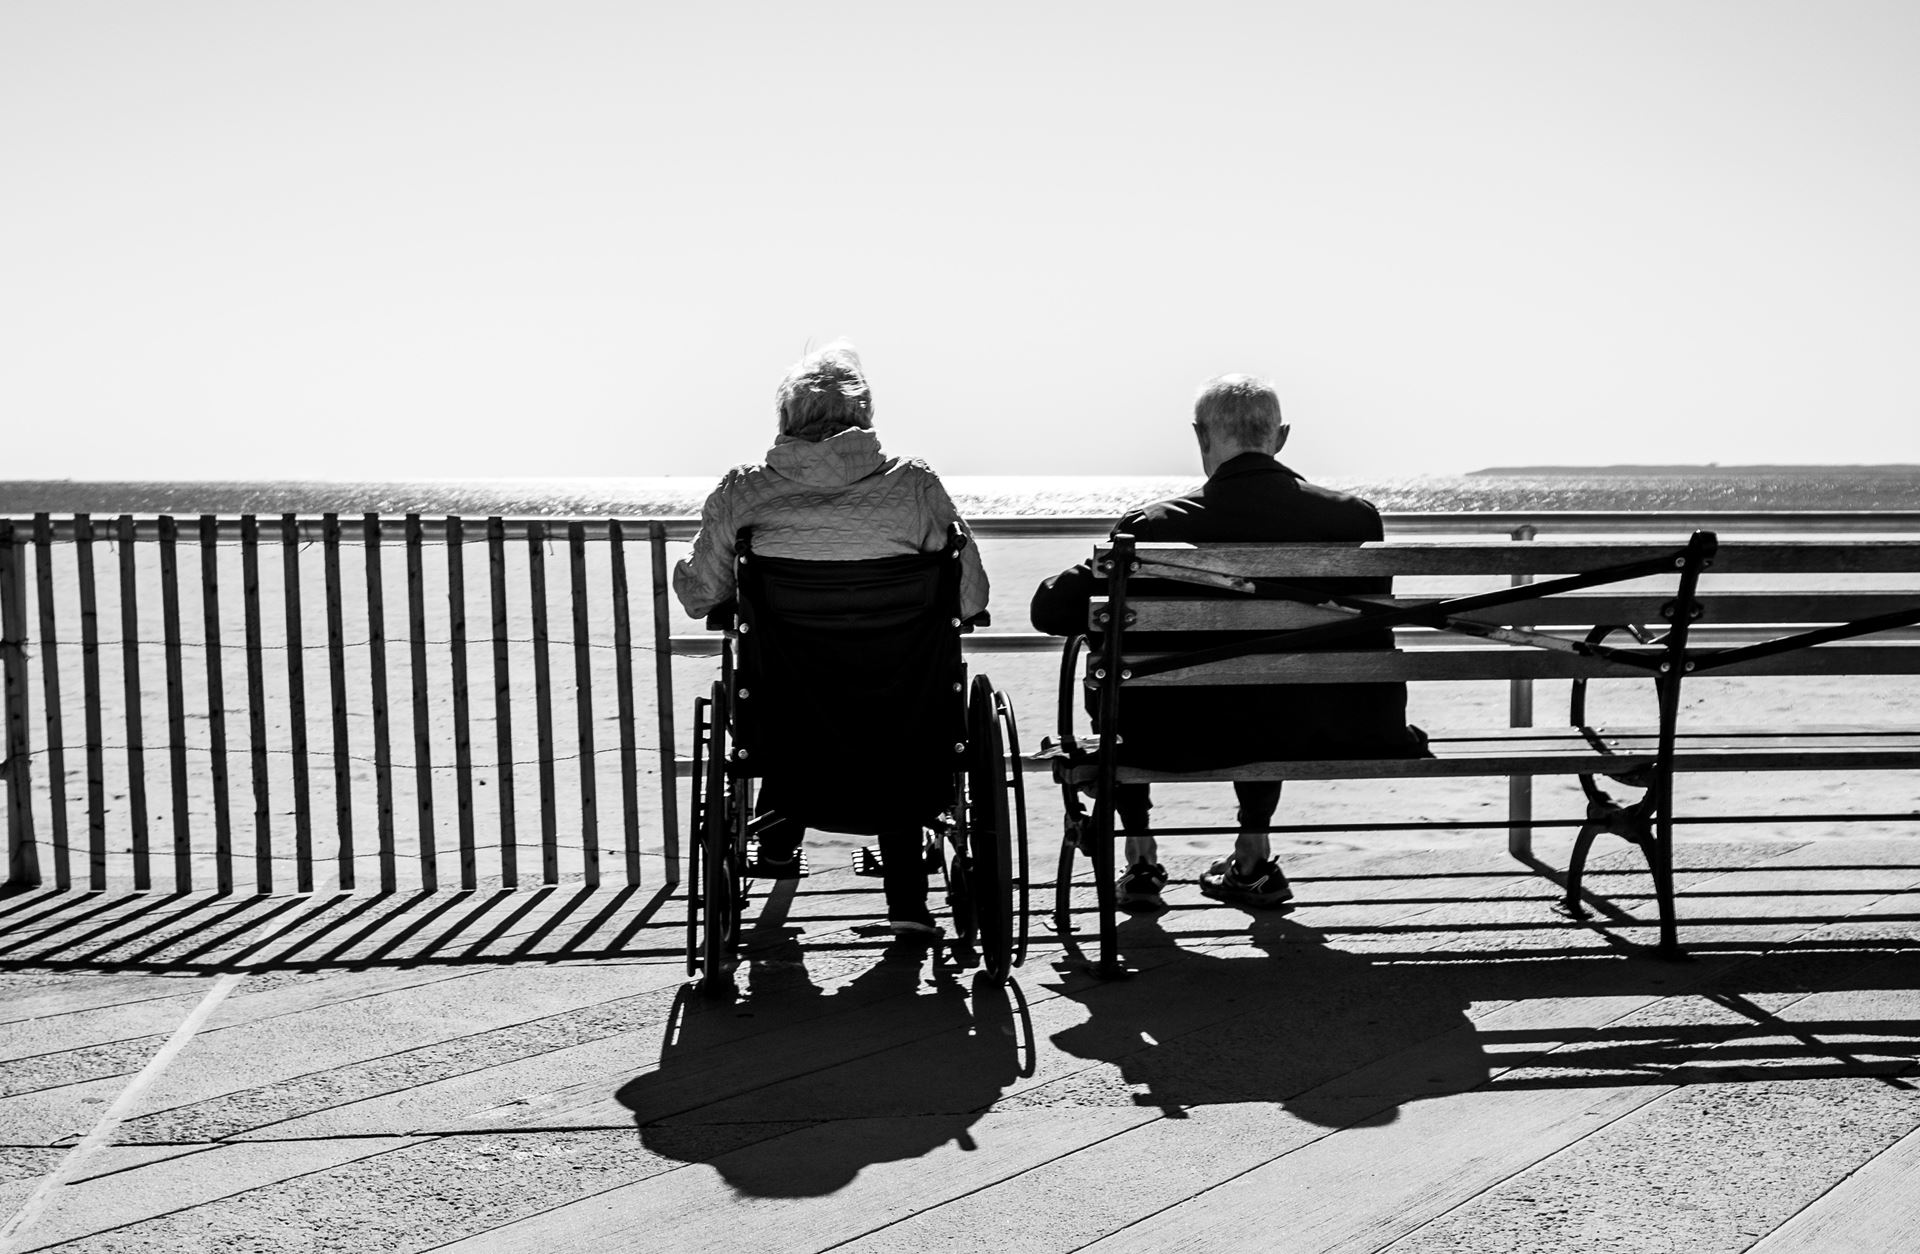 two people sitting on a bench and in a wheelchair next to the bench